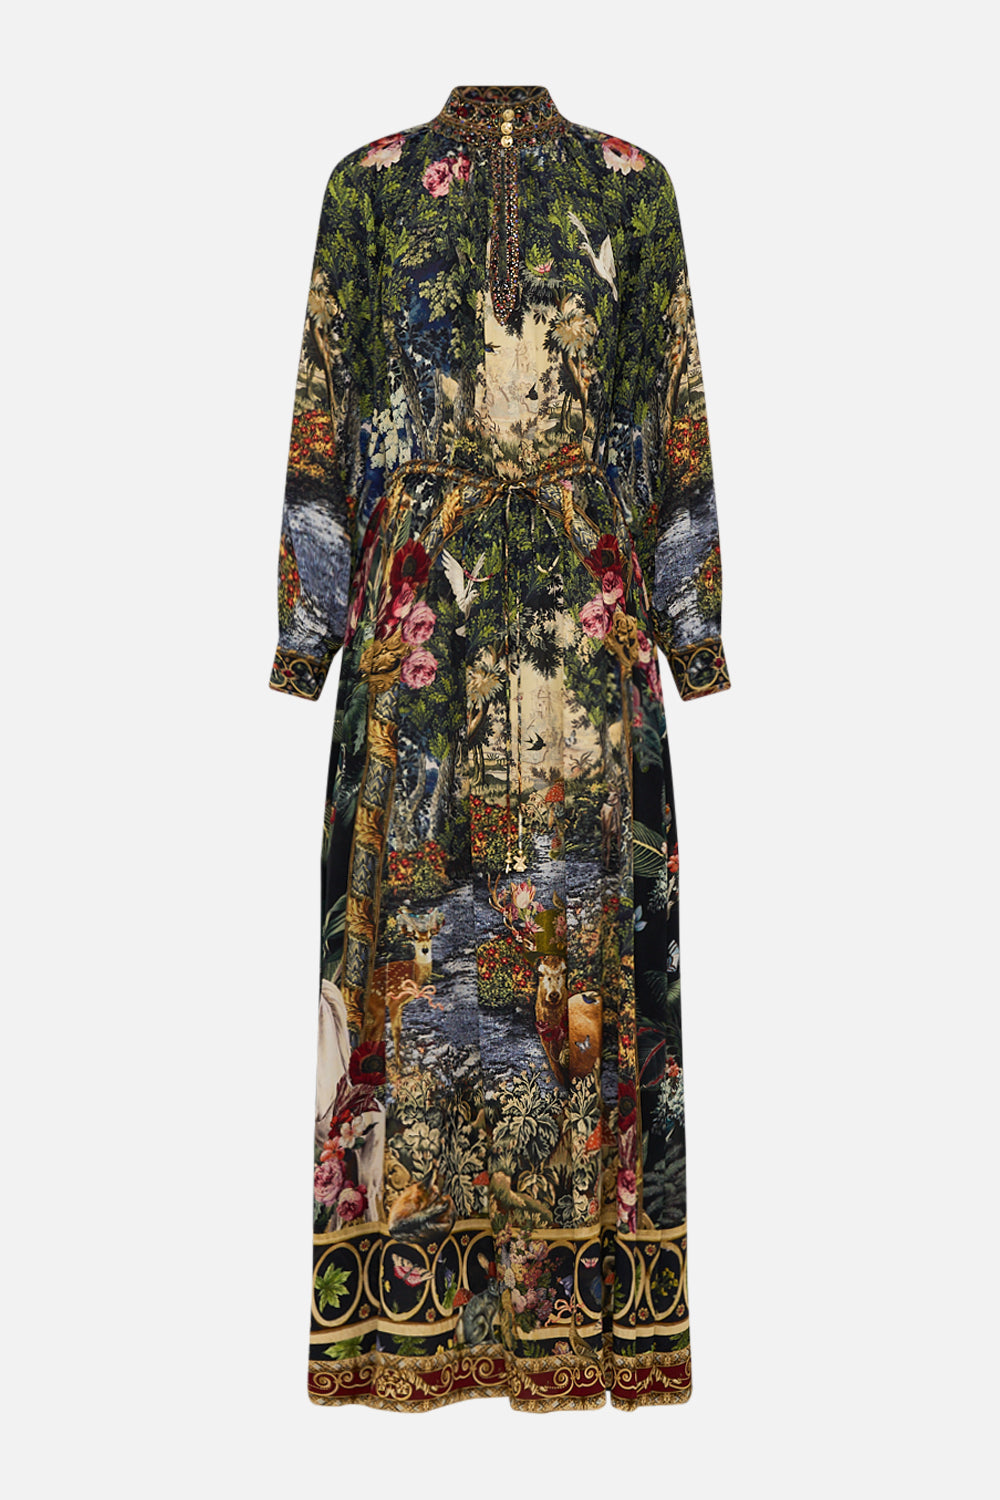 CAMILLA Floral Drawcord Waist Long Dress in Tapestry Totems